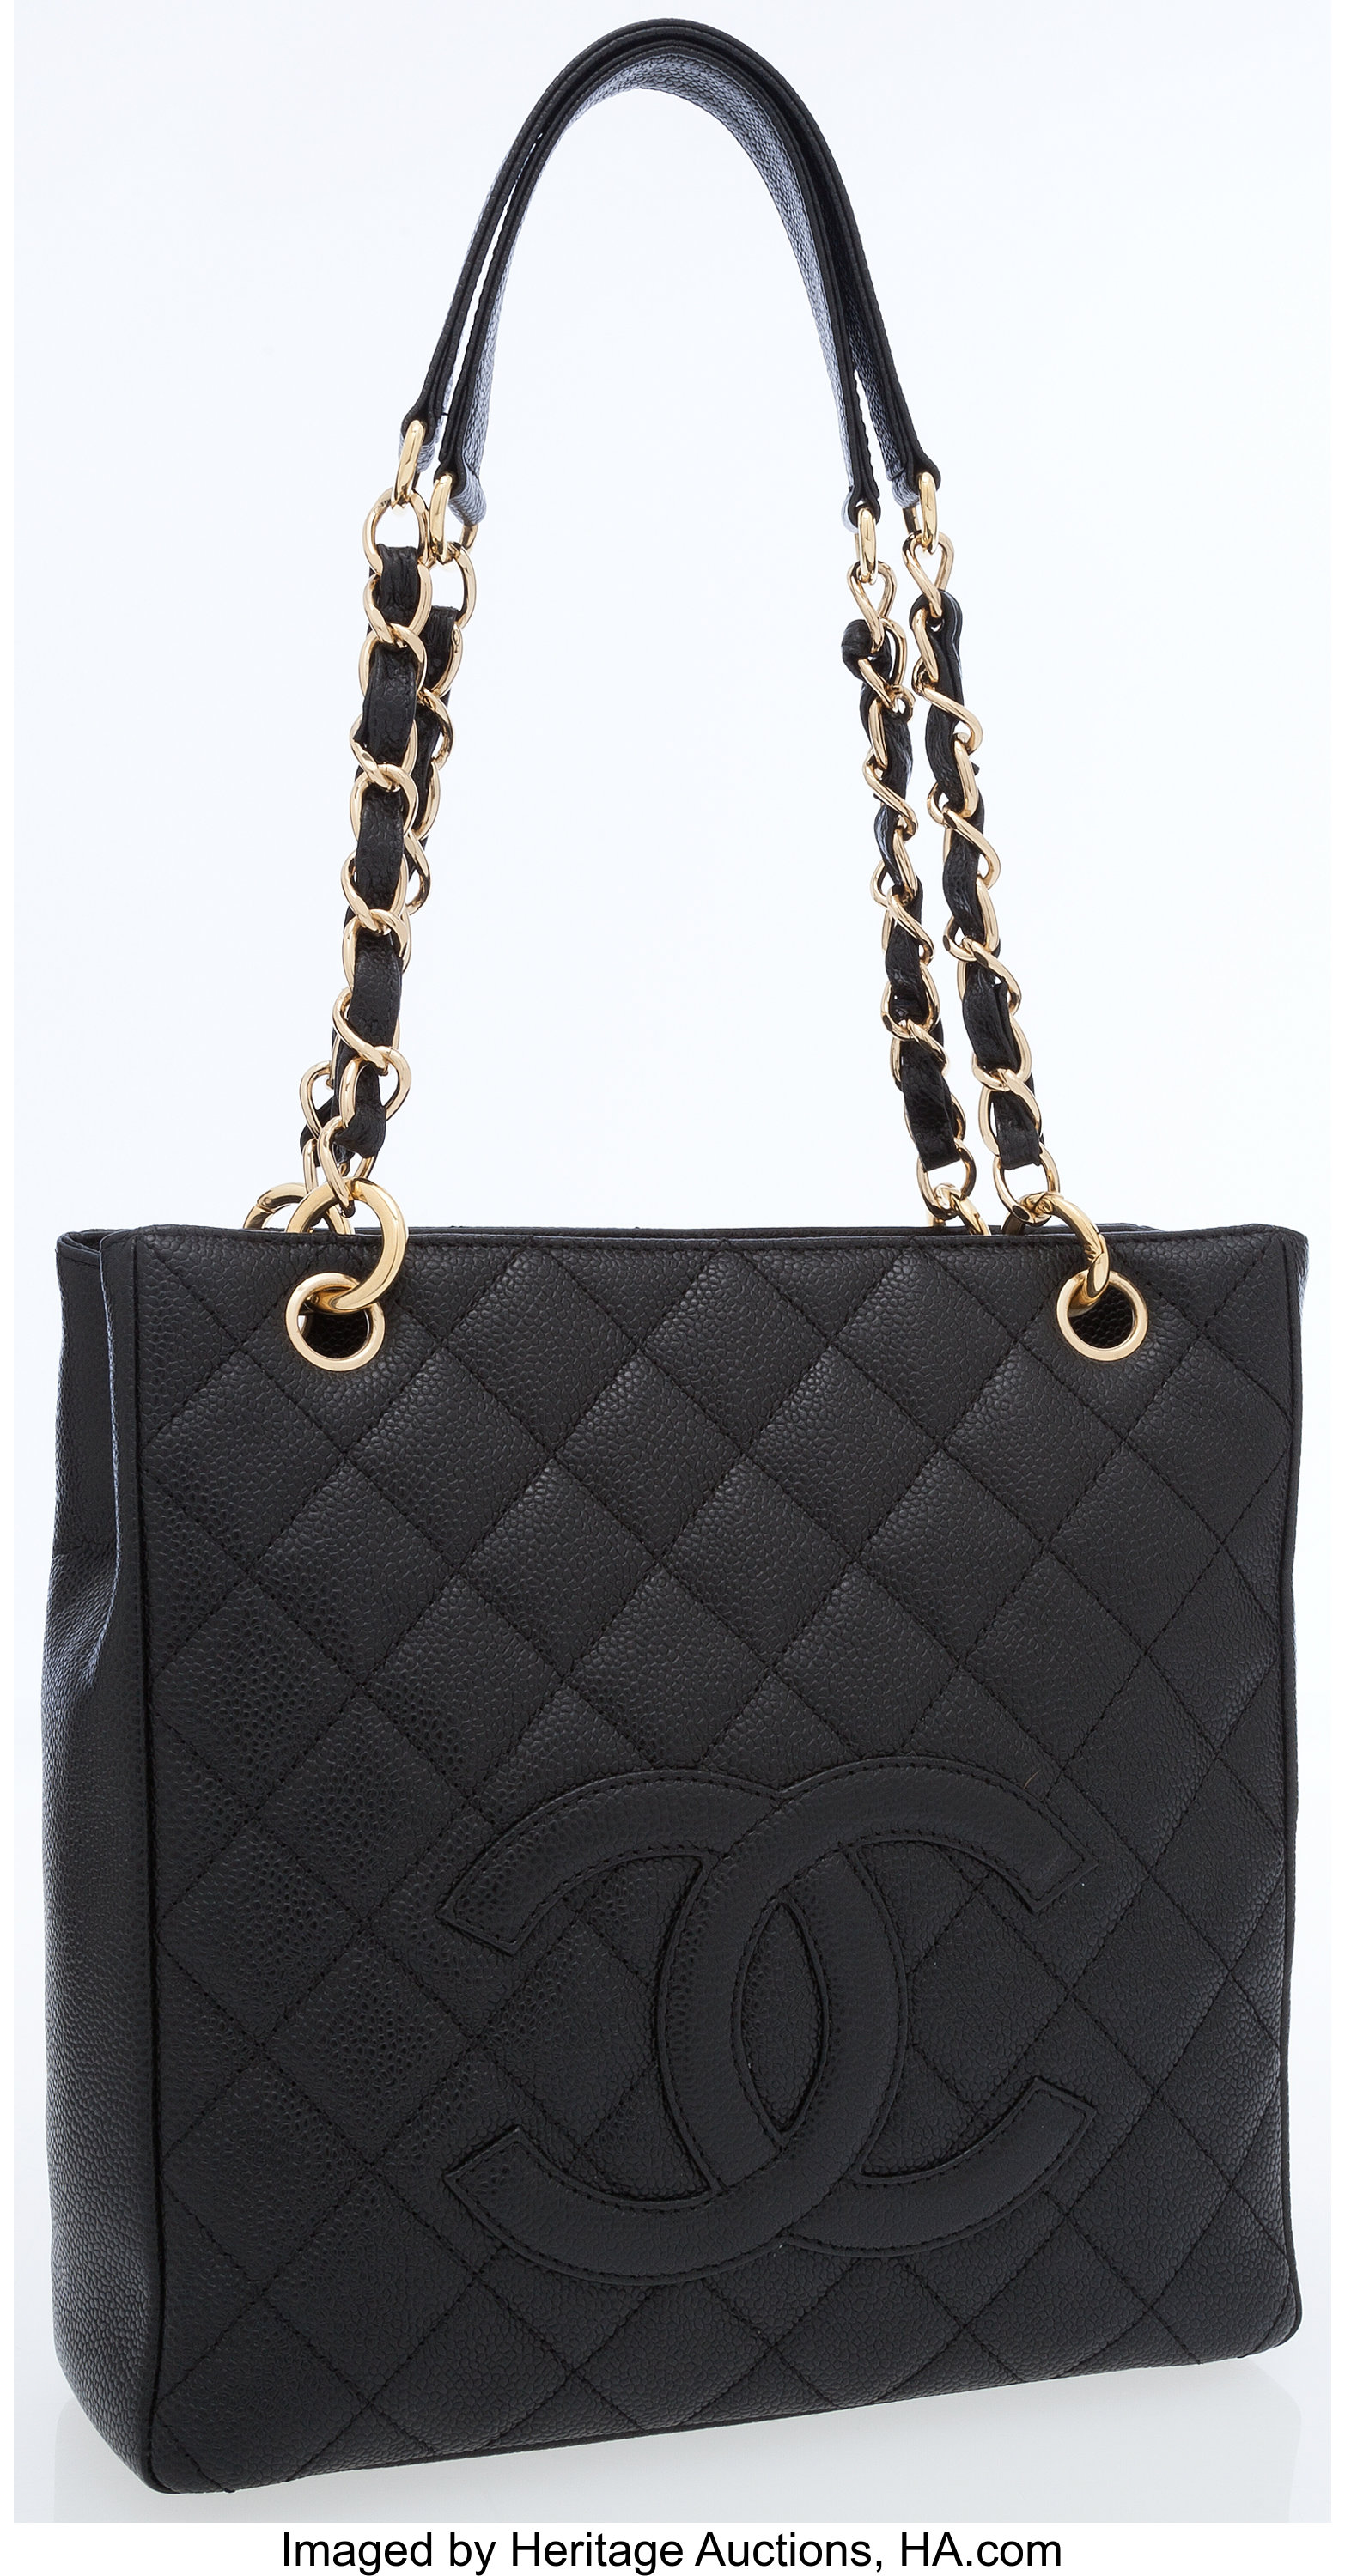 Sold at Auction: CHANEL - Petite Timeless Tote Caviar Quilted Leather -  White Shoulder Bag / Tote